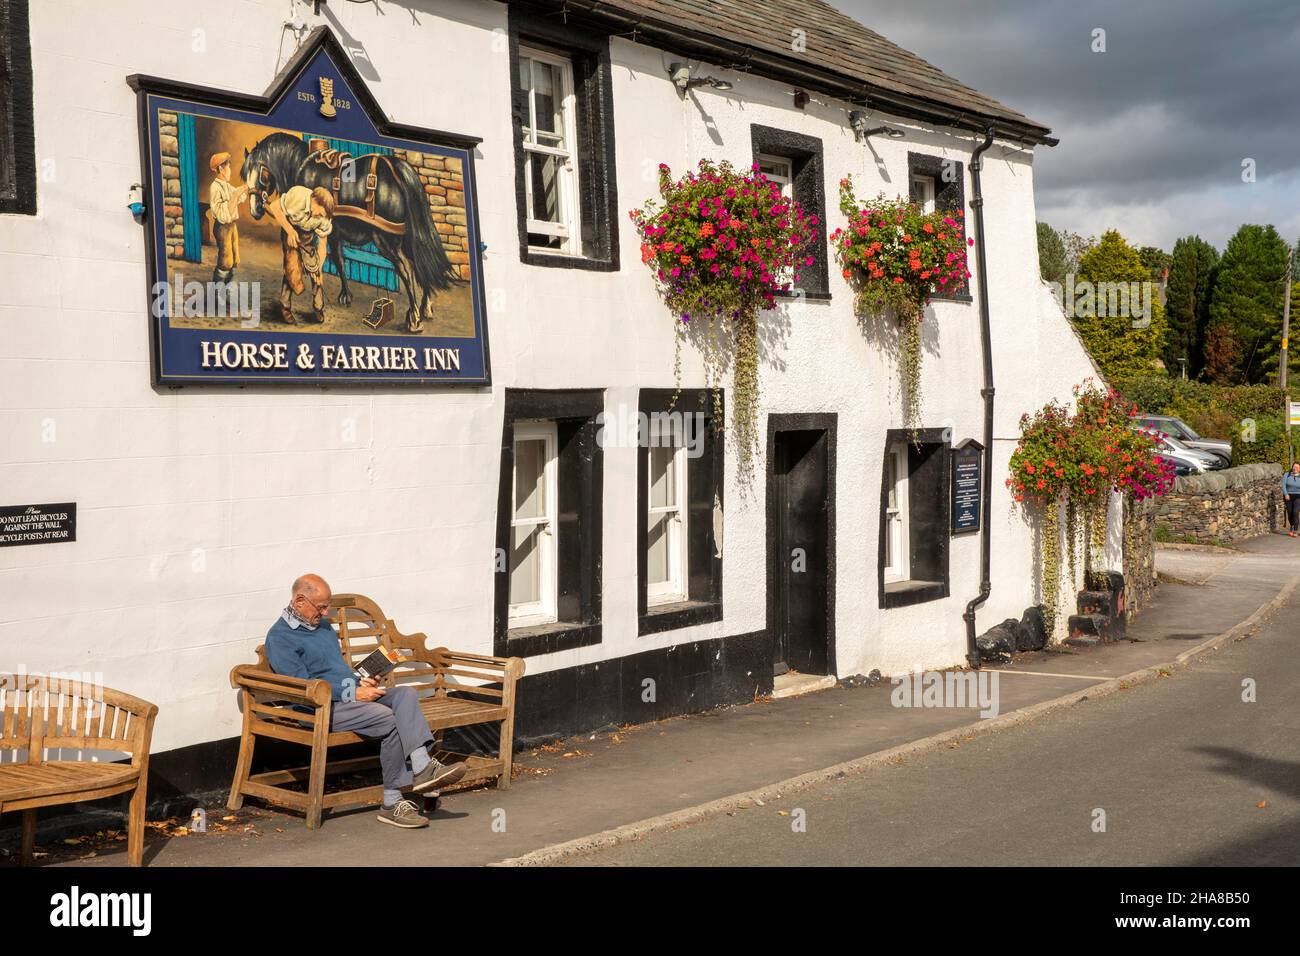 UK, Cumbria, Allerdale, Keswick, Threlkeld, man reading in sunshine below Horse and Farrier pub sign Stock Photo